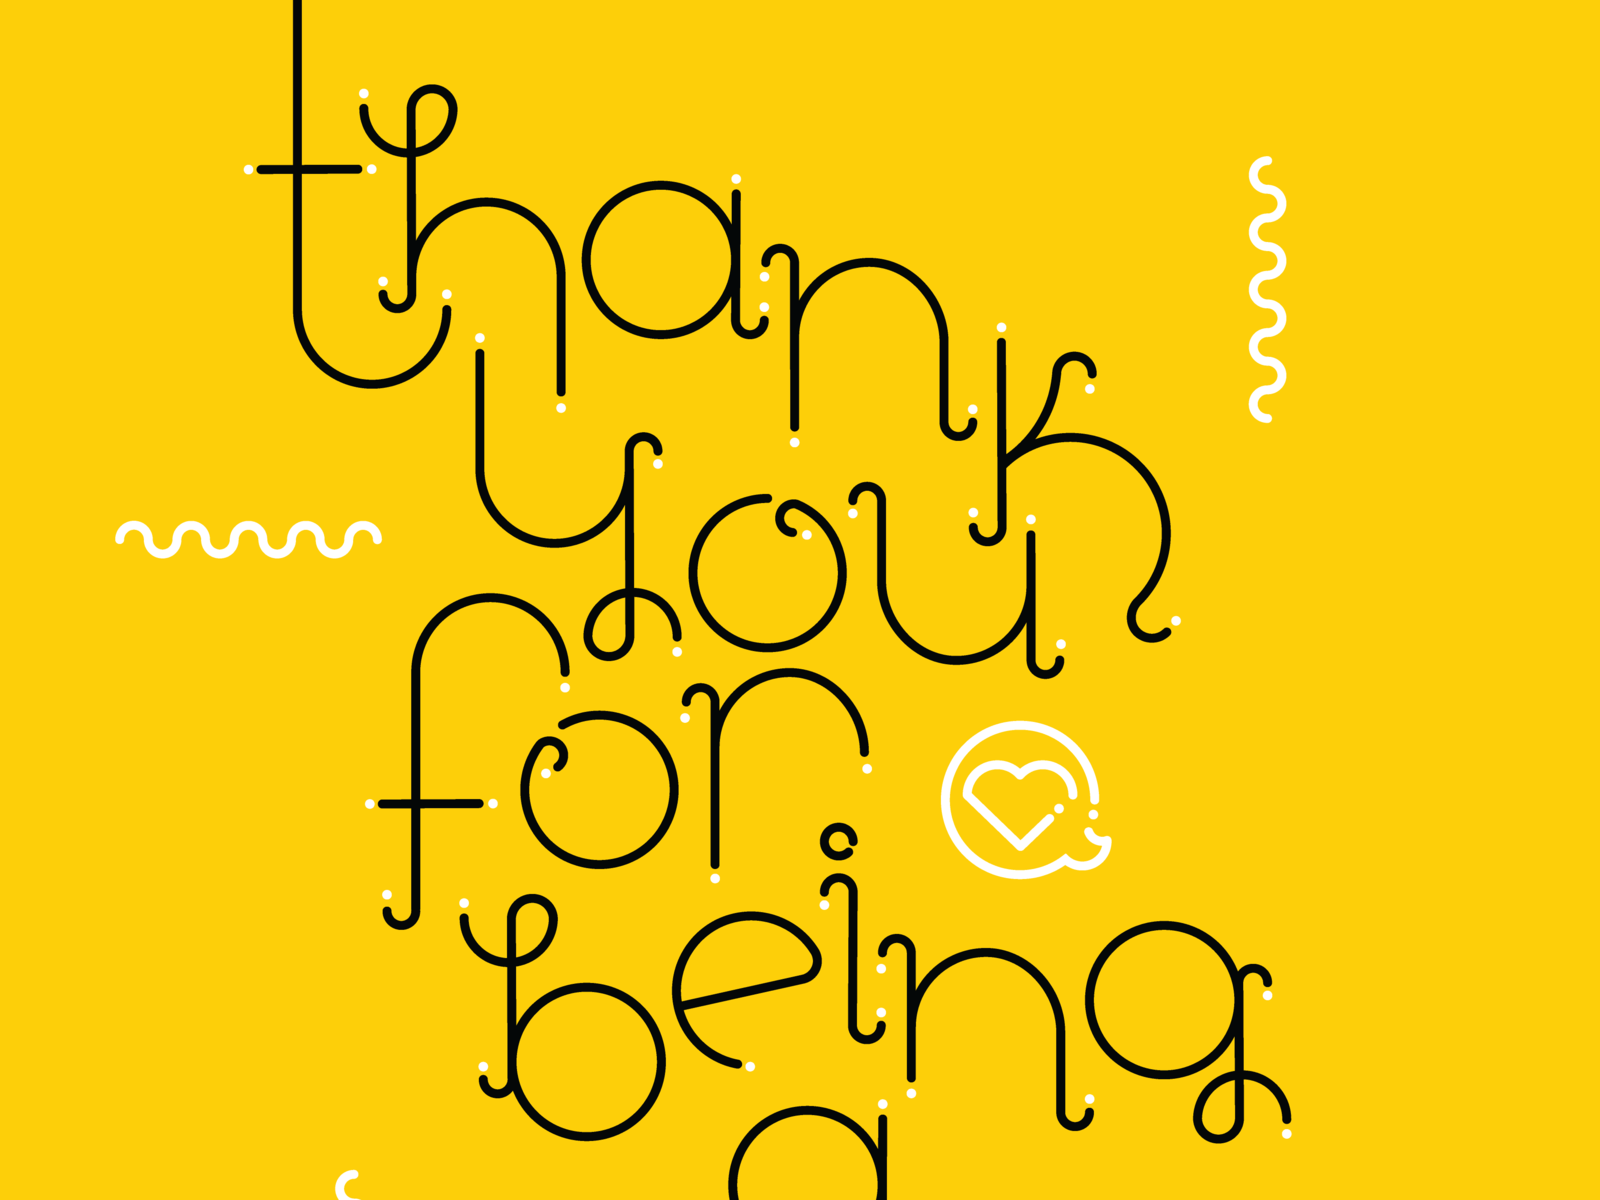 Thank you for being a friend by Lydia Stutzman on Dribbble